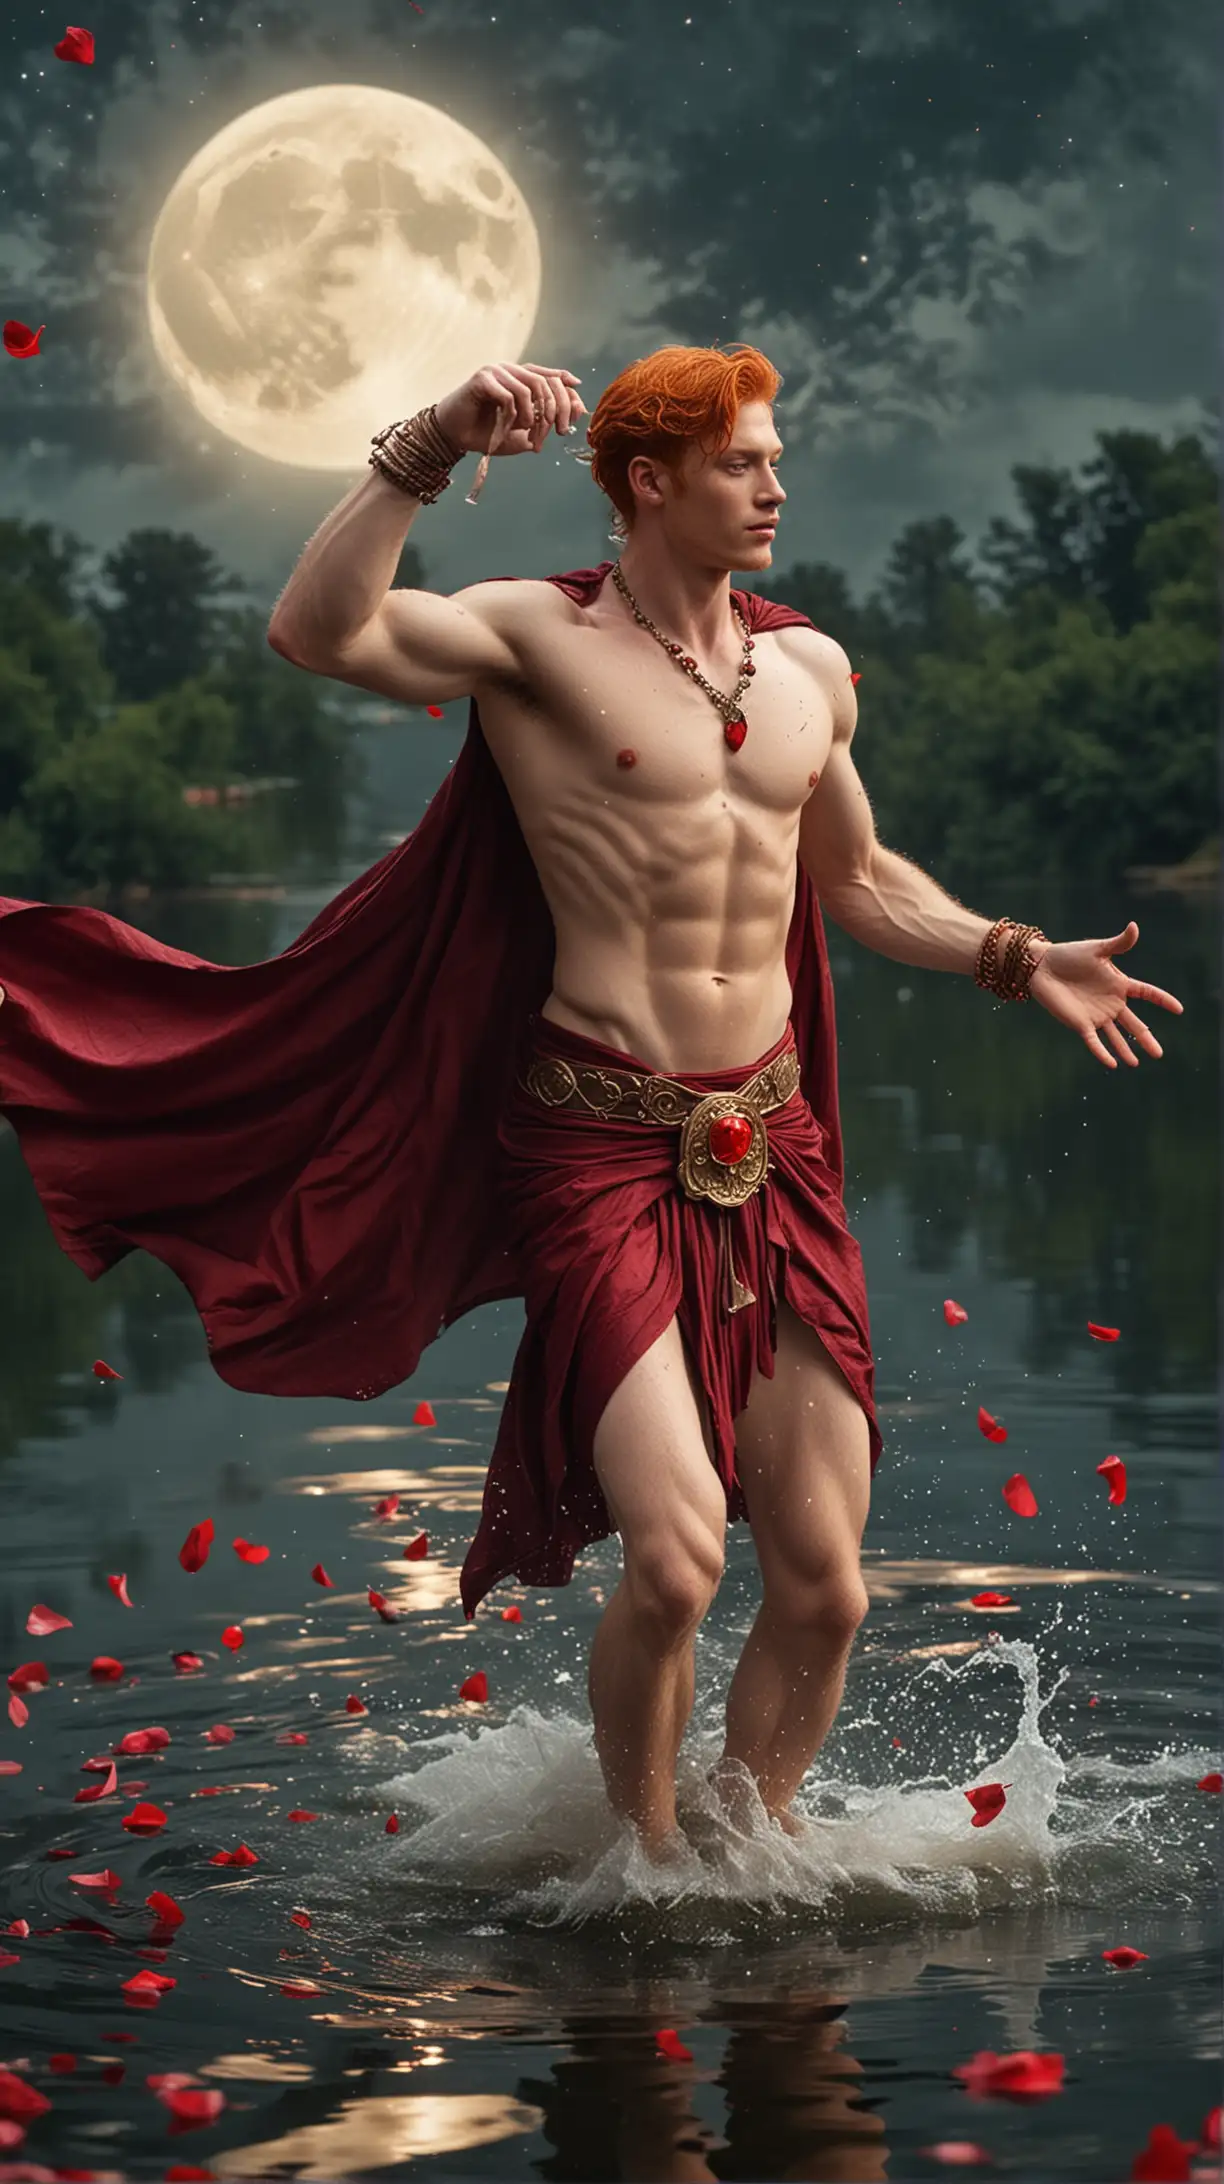 Redheaded Shirtless Warrior Mage Flying Over Quiet Lake at Full Moon Night